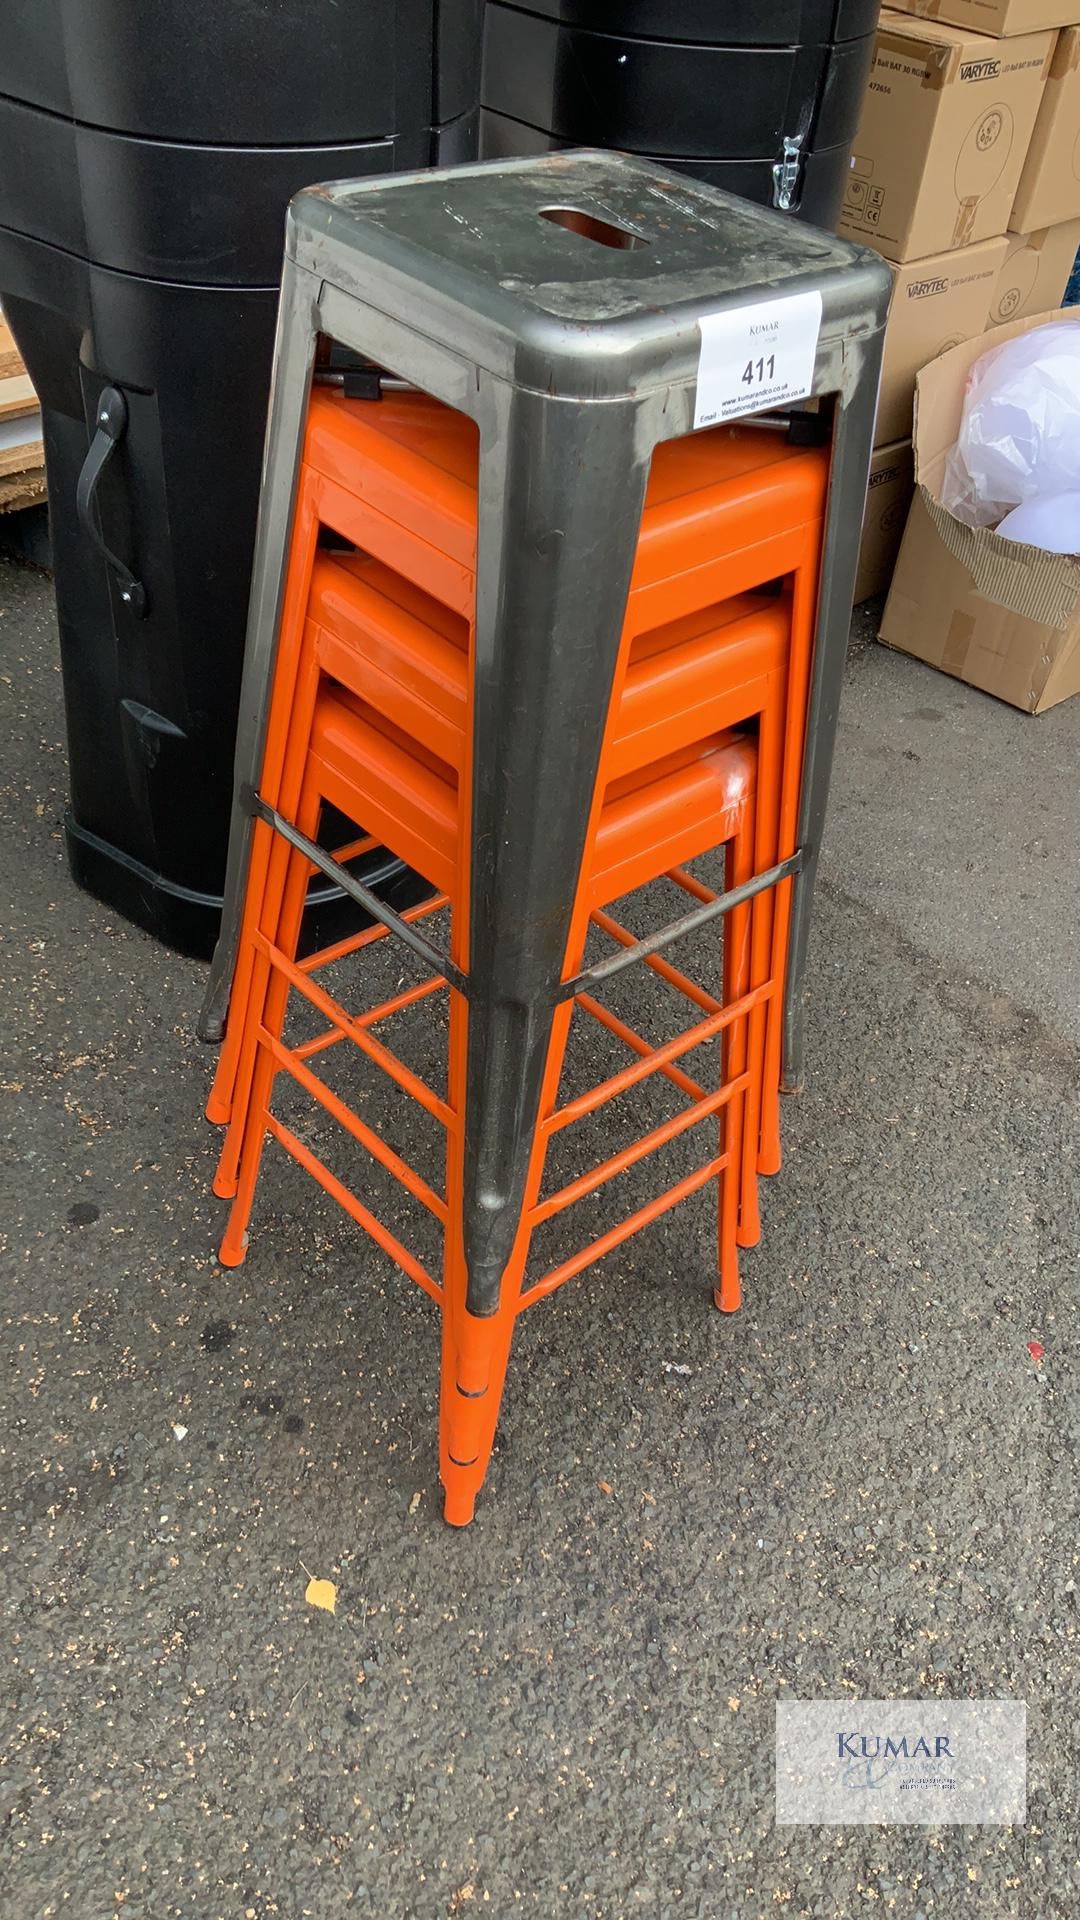 Set of 4 Callie backless metal bar stools 1 metal silver colour and 3 in orange 765mm high - Image 3 of 3